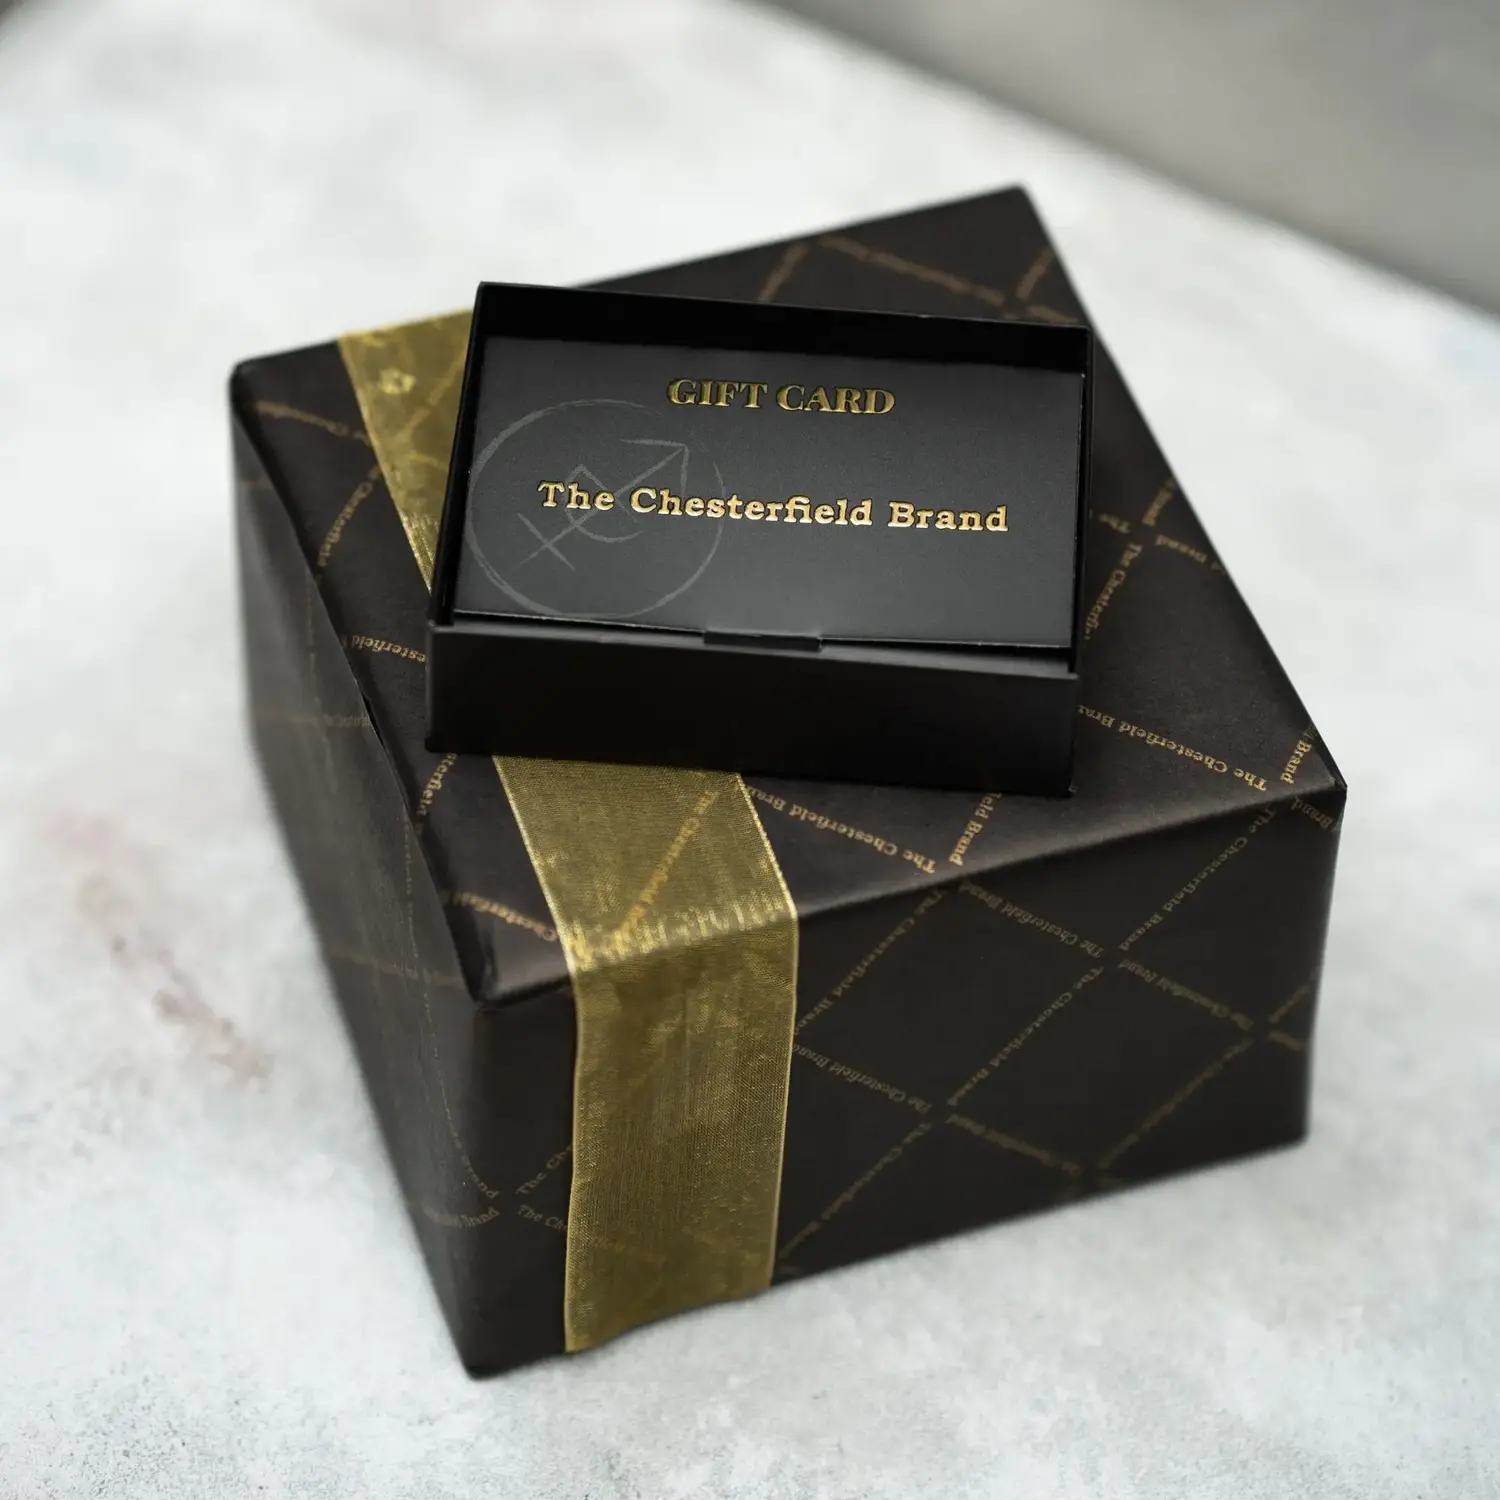 Gift card  The Chesterfield Brand - The Chesterfield Brand